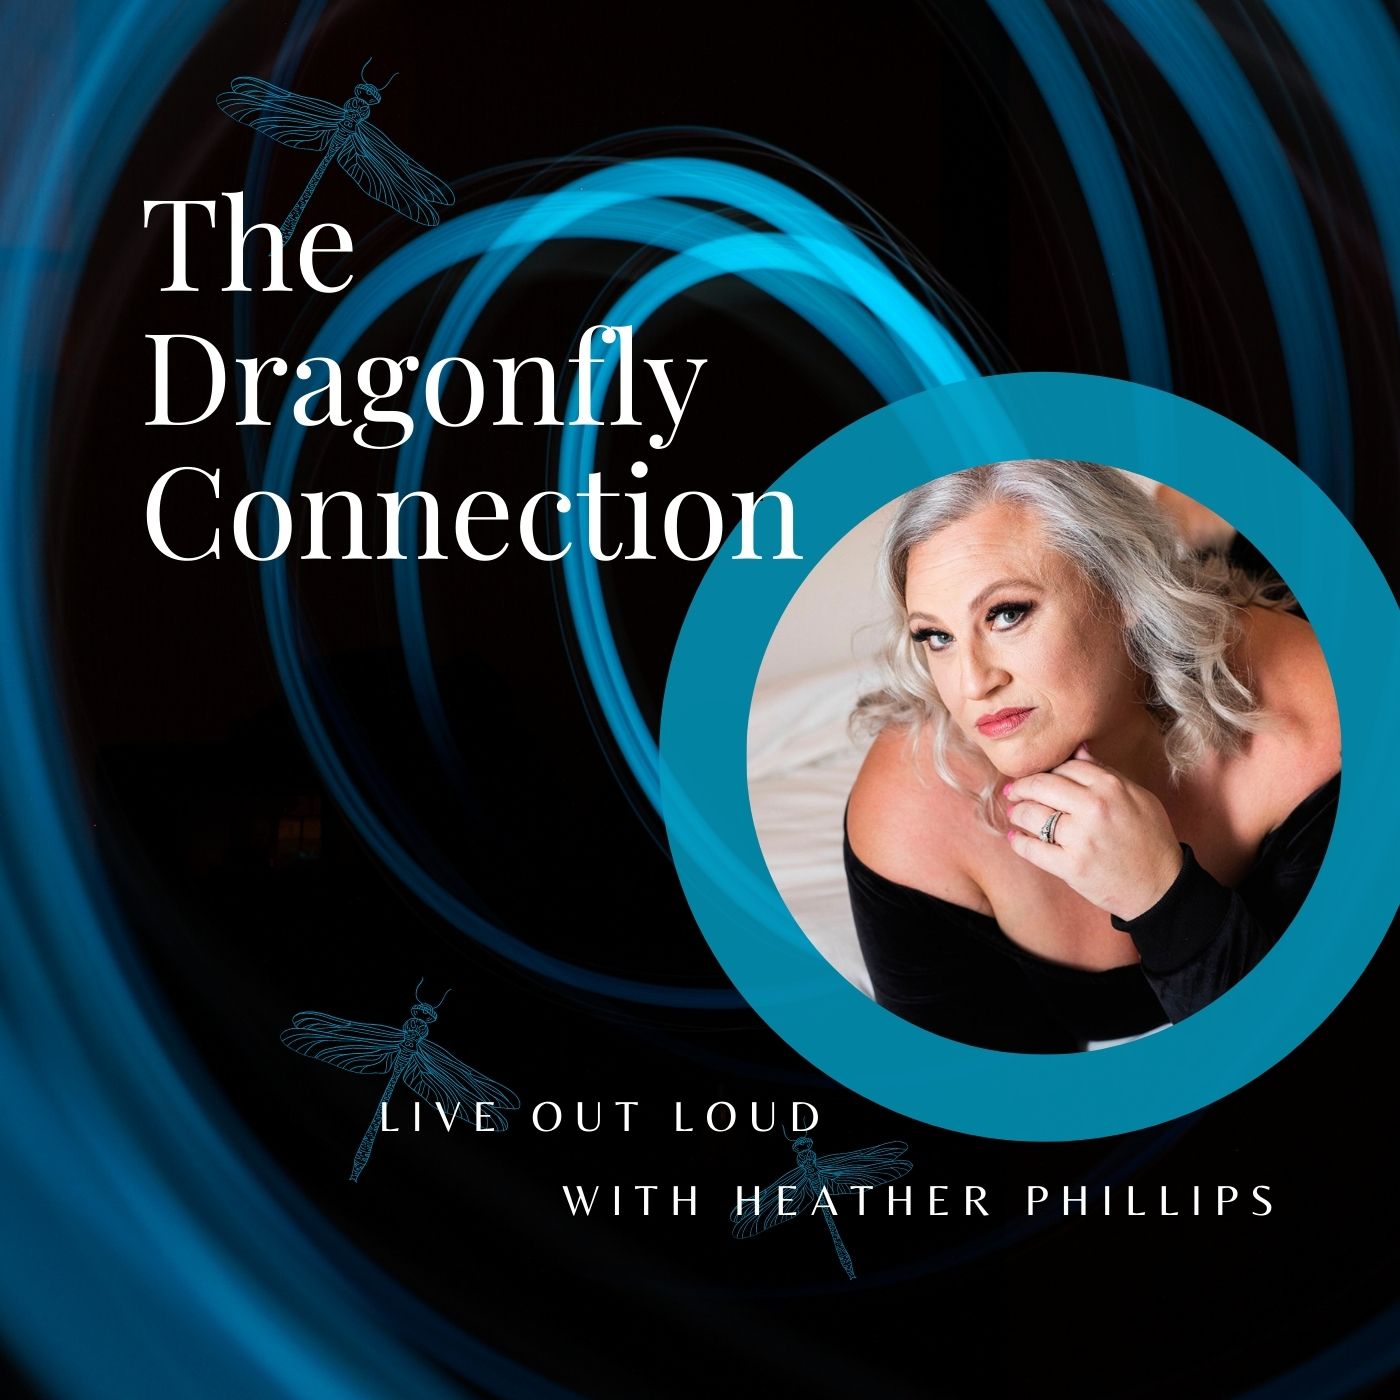 Live Out Loud with Heather Phillips